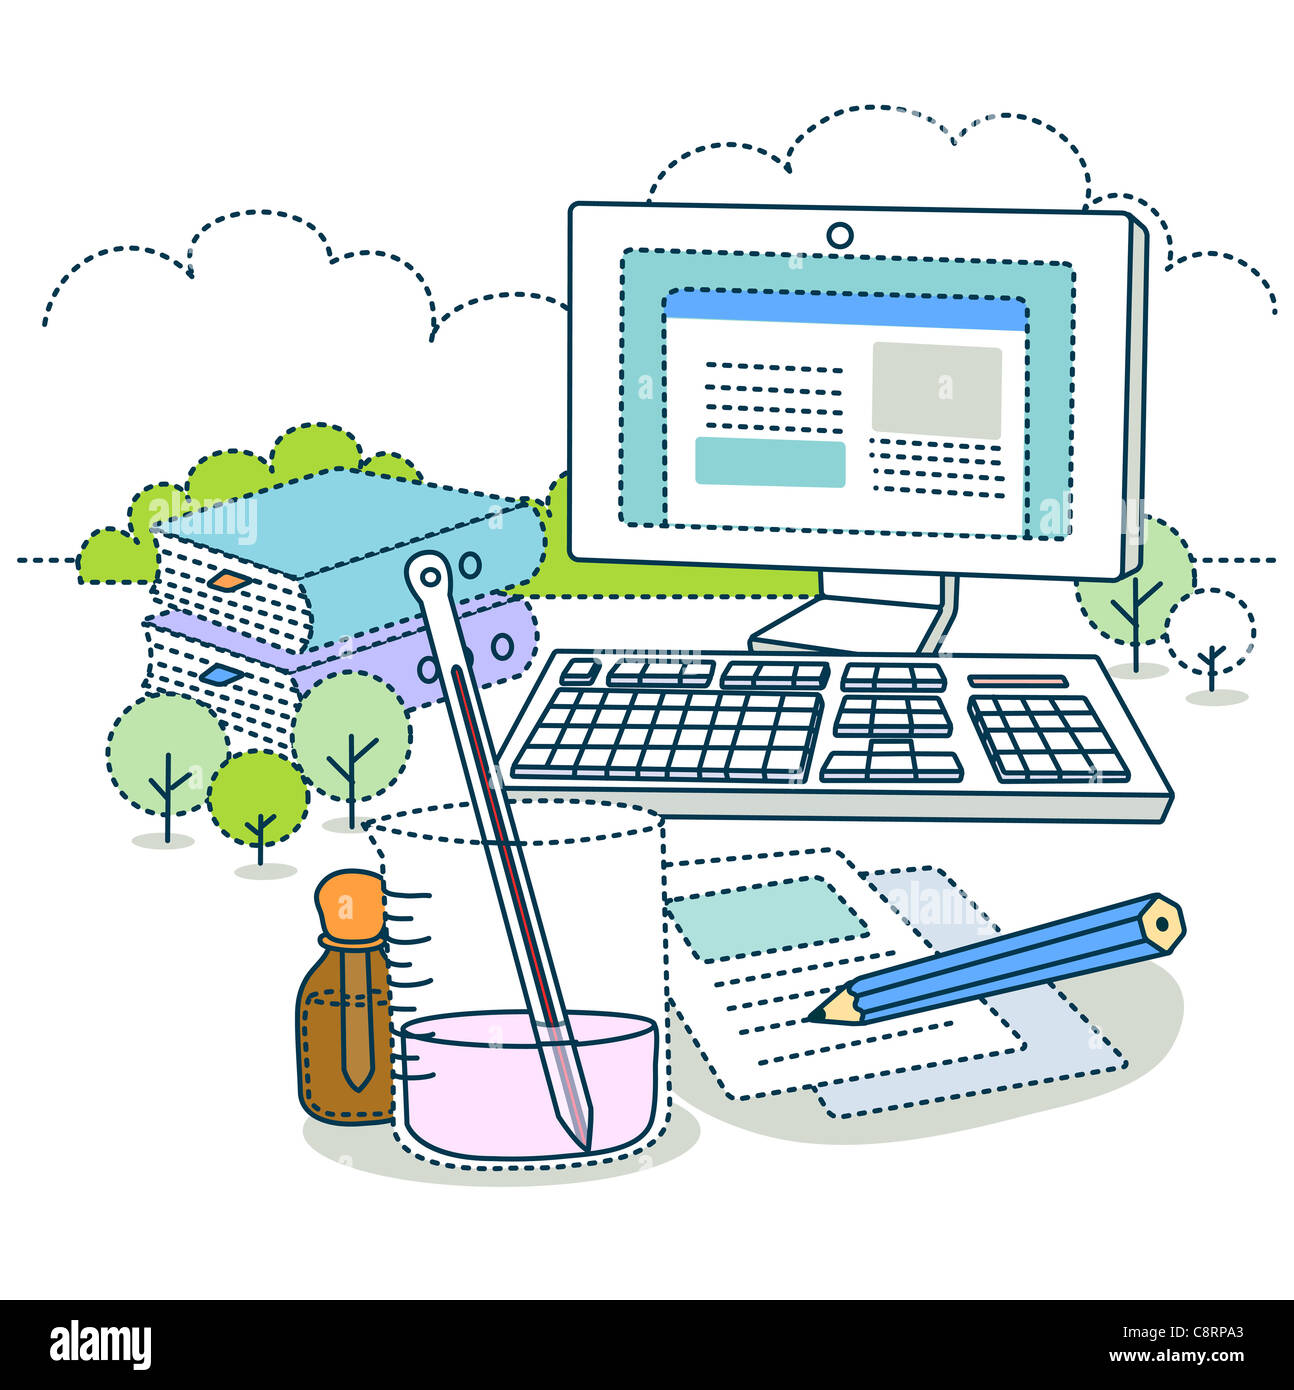 Illustration of computer and scientific experiment Stock Photo